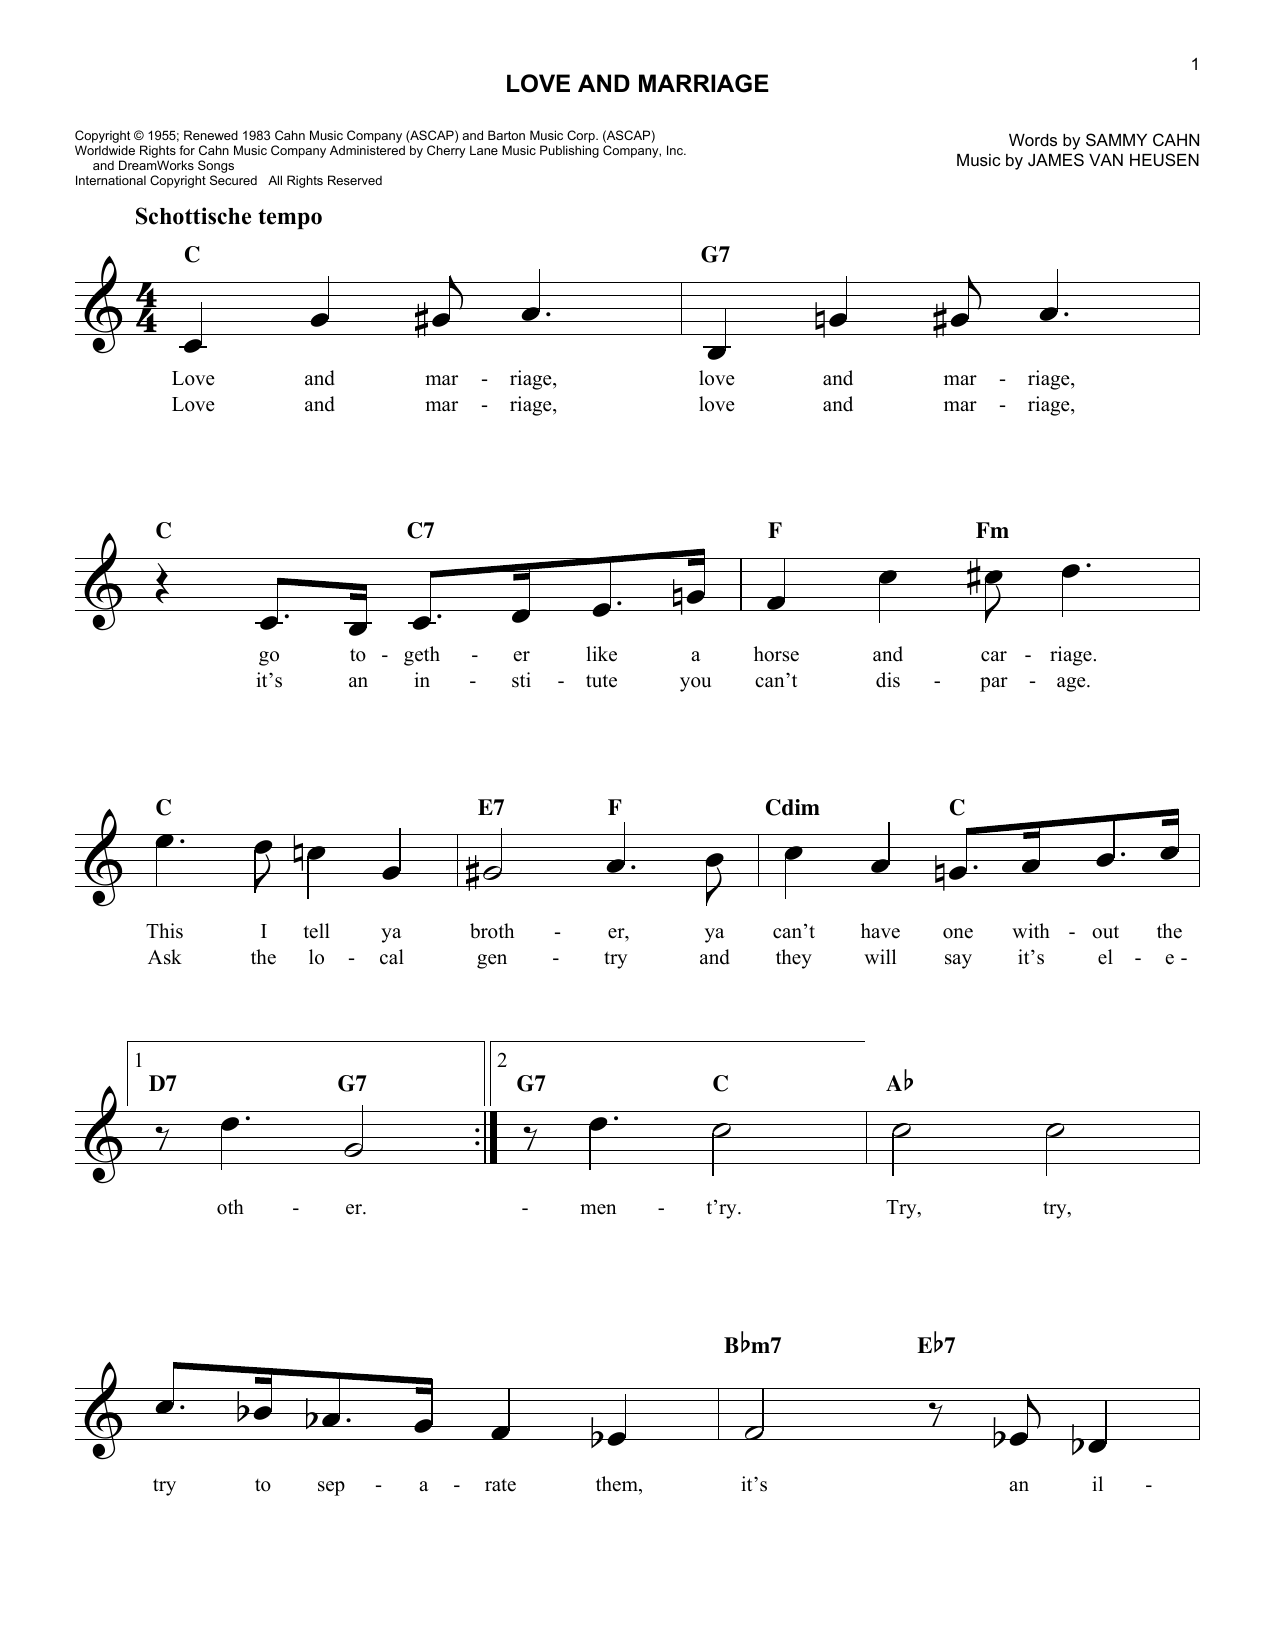 Sammy Cahn Love And Marriage sheet music notes and chords. Download Printable PDF.